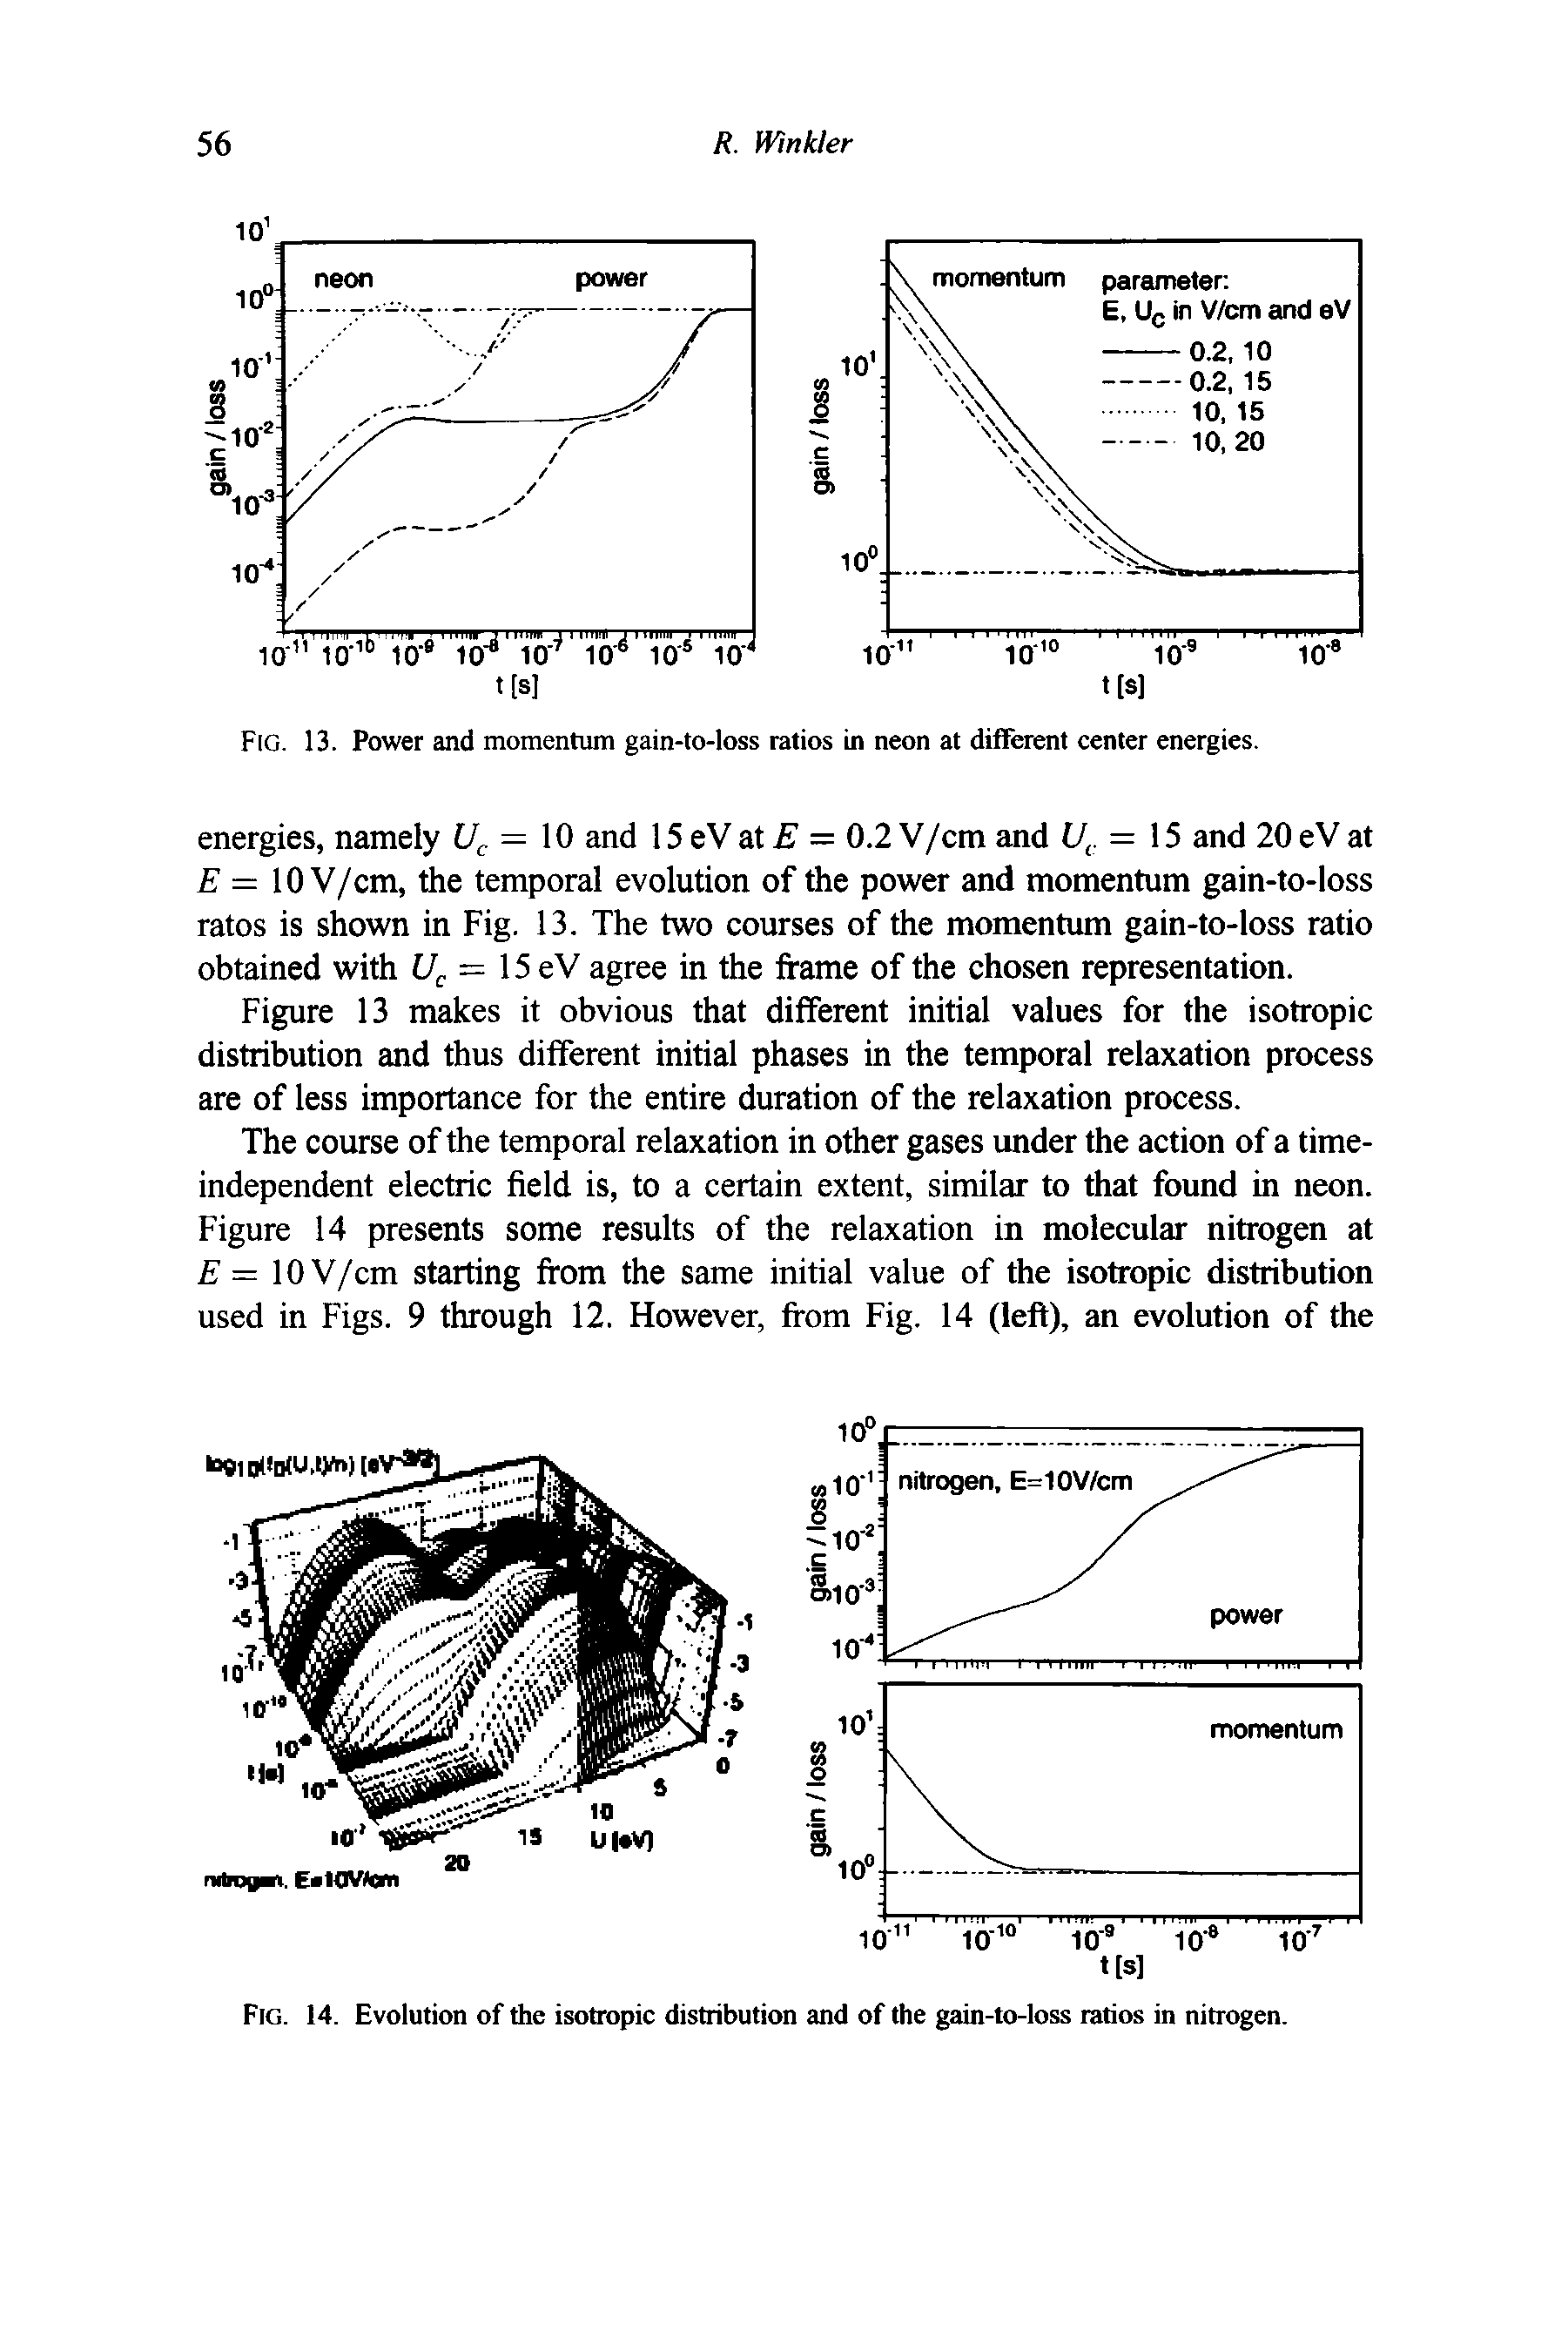 Fig. 14. Evolution of the isotropic distribution and of the gain-to-loss ratios in nitrogen.